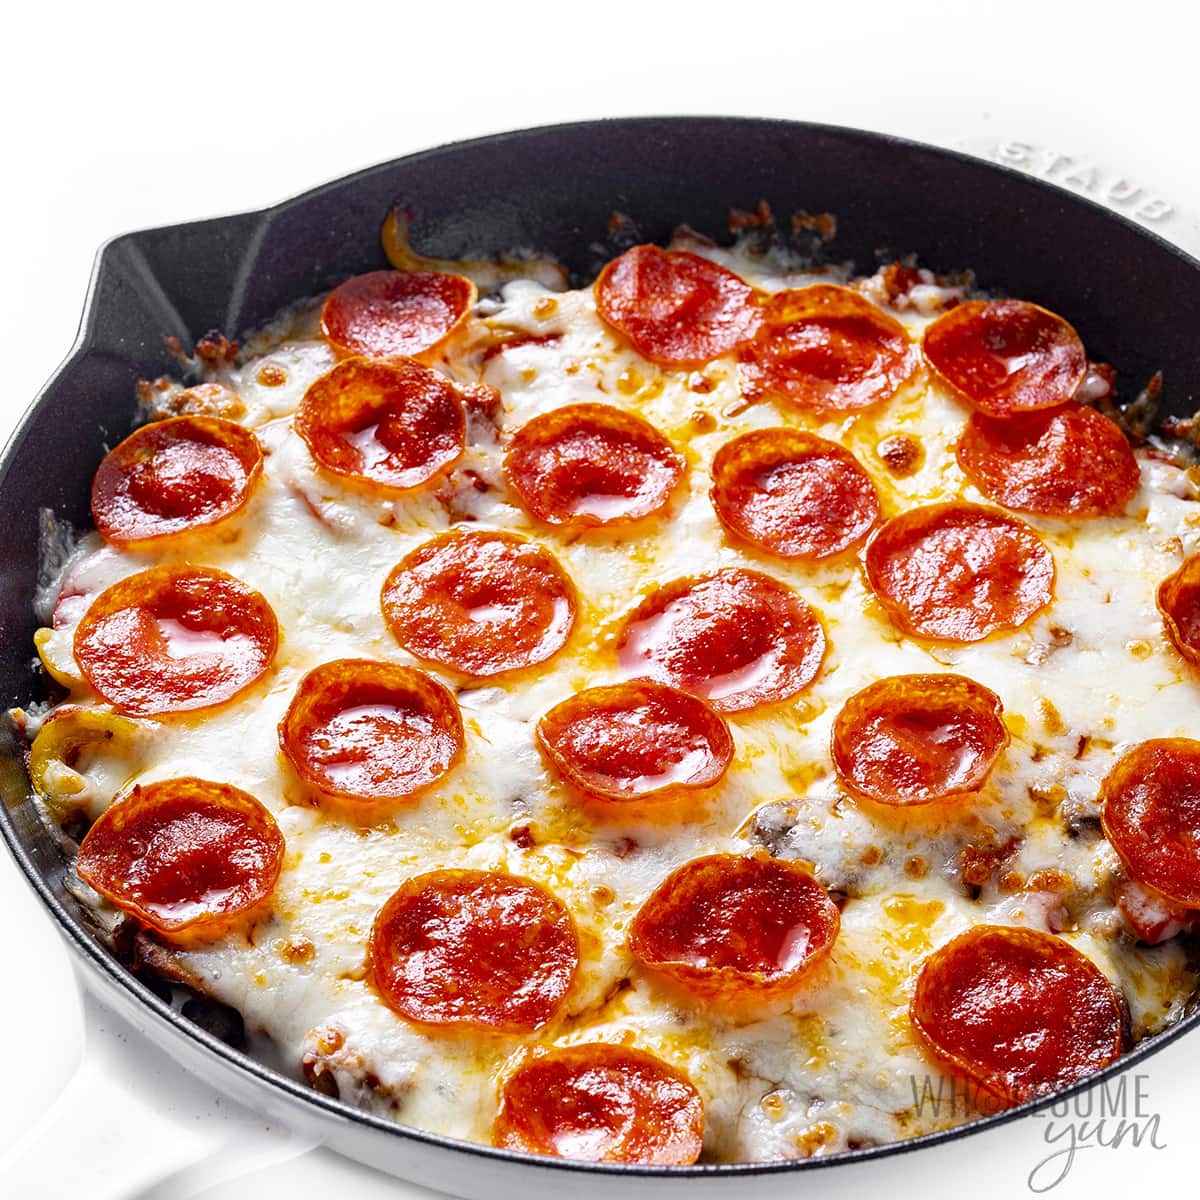 Baked pizza without crust in a skillet.